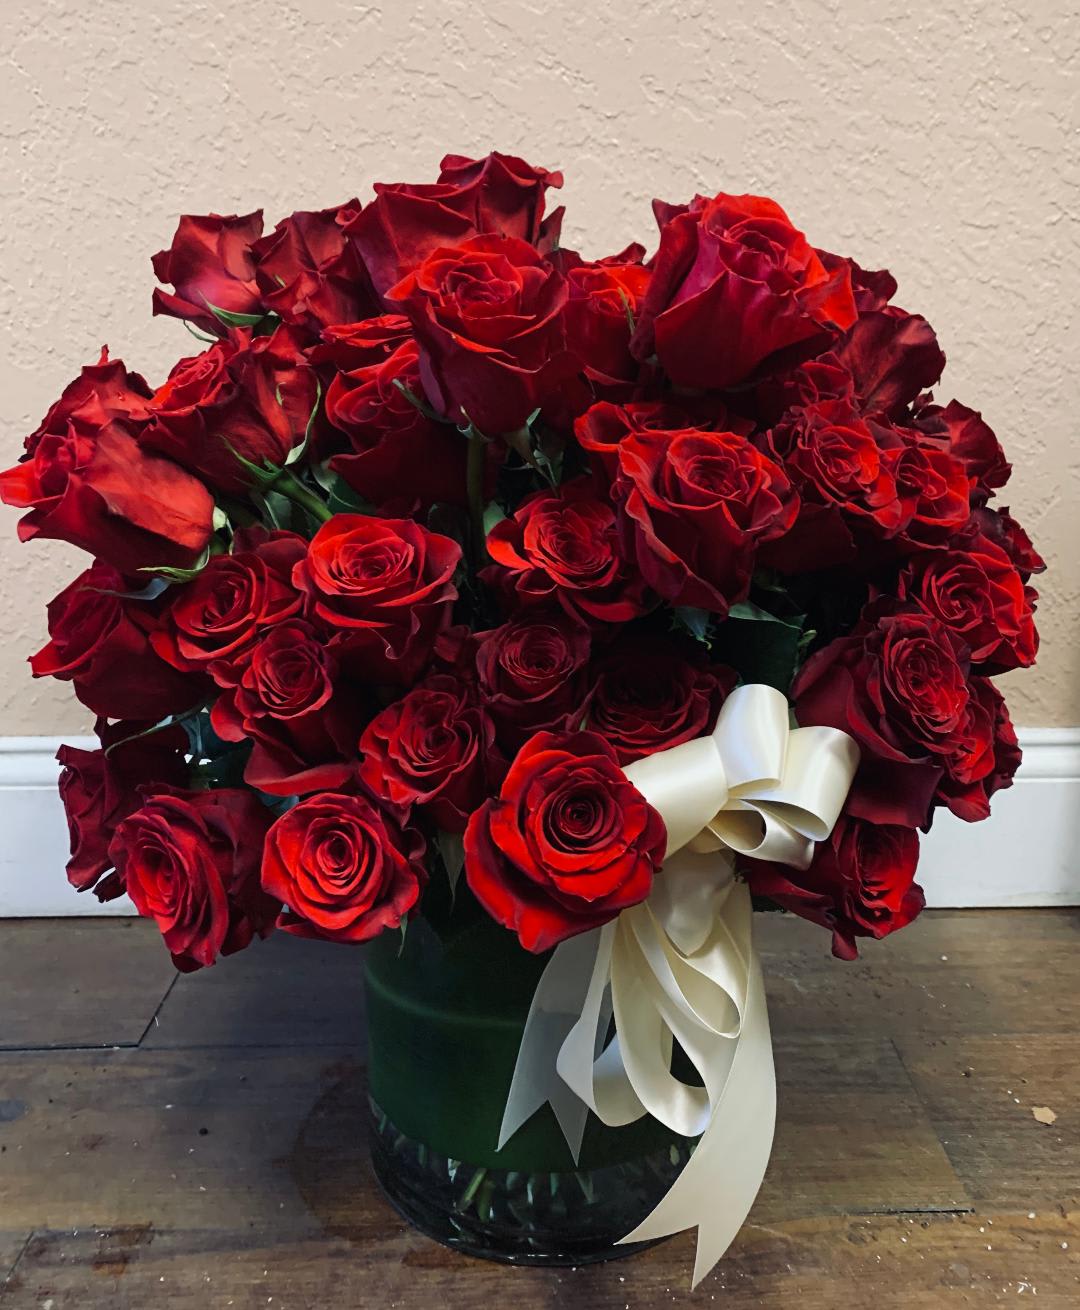 100 Red Roses  - Give your loved one a full lush arrangements of 100 red roses  - Done long stem or low and in any color 